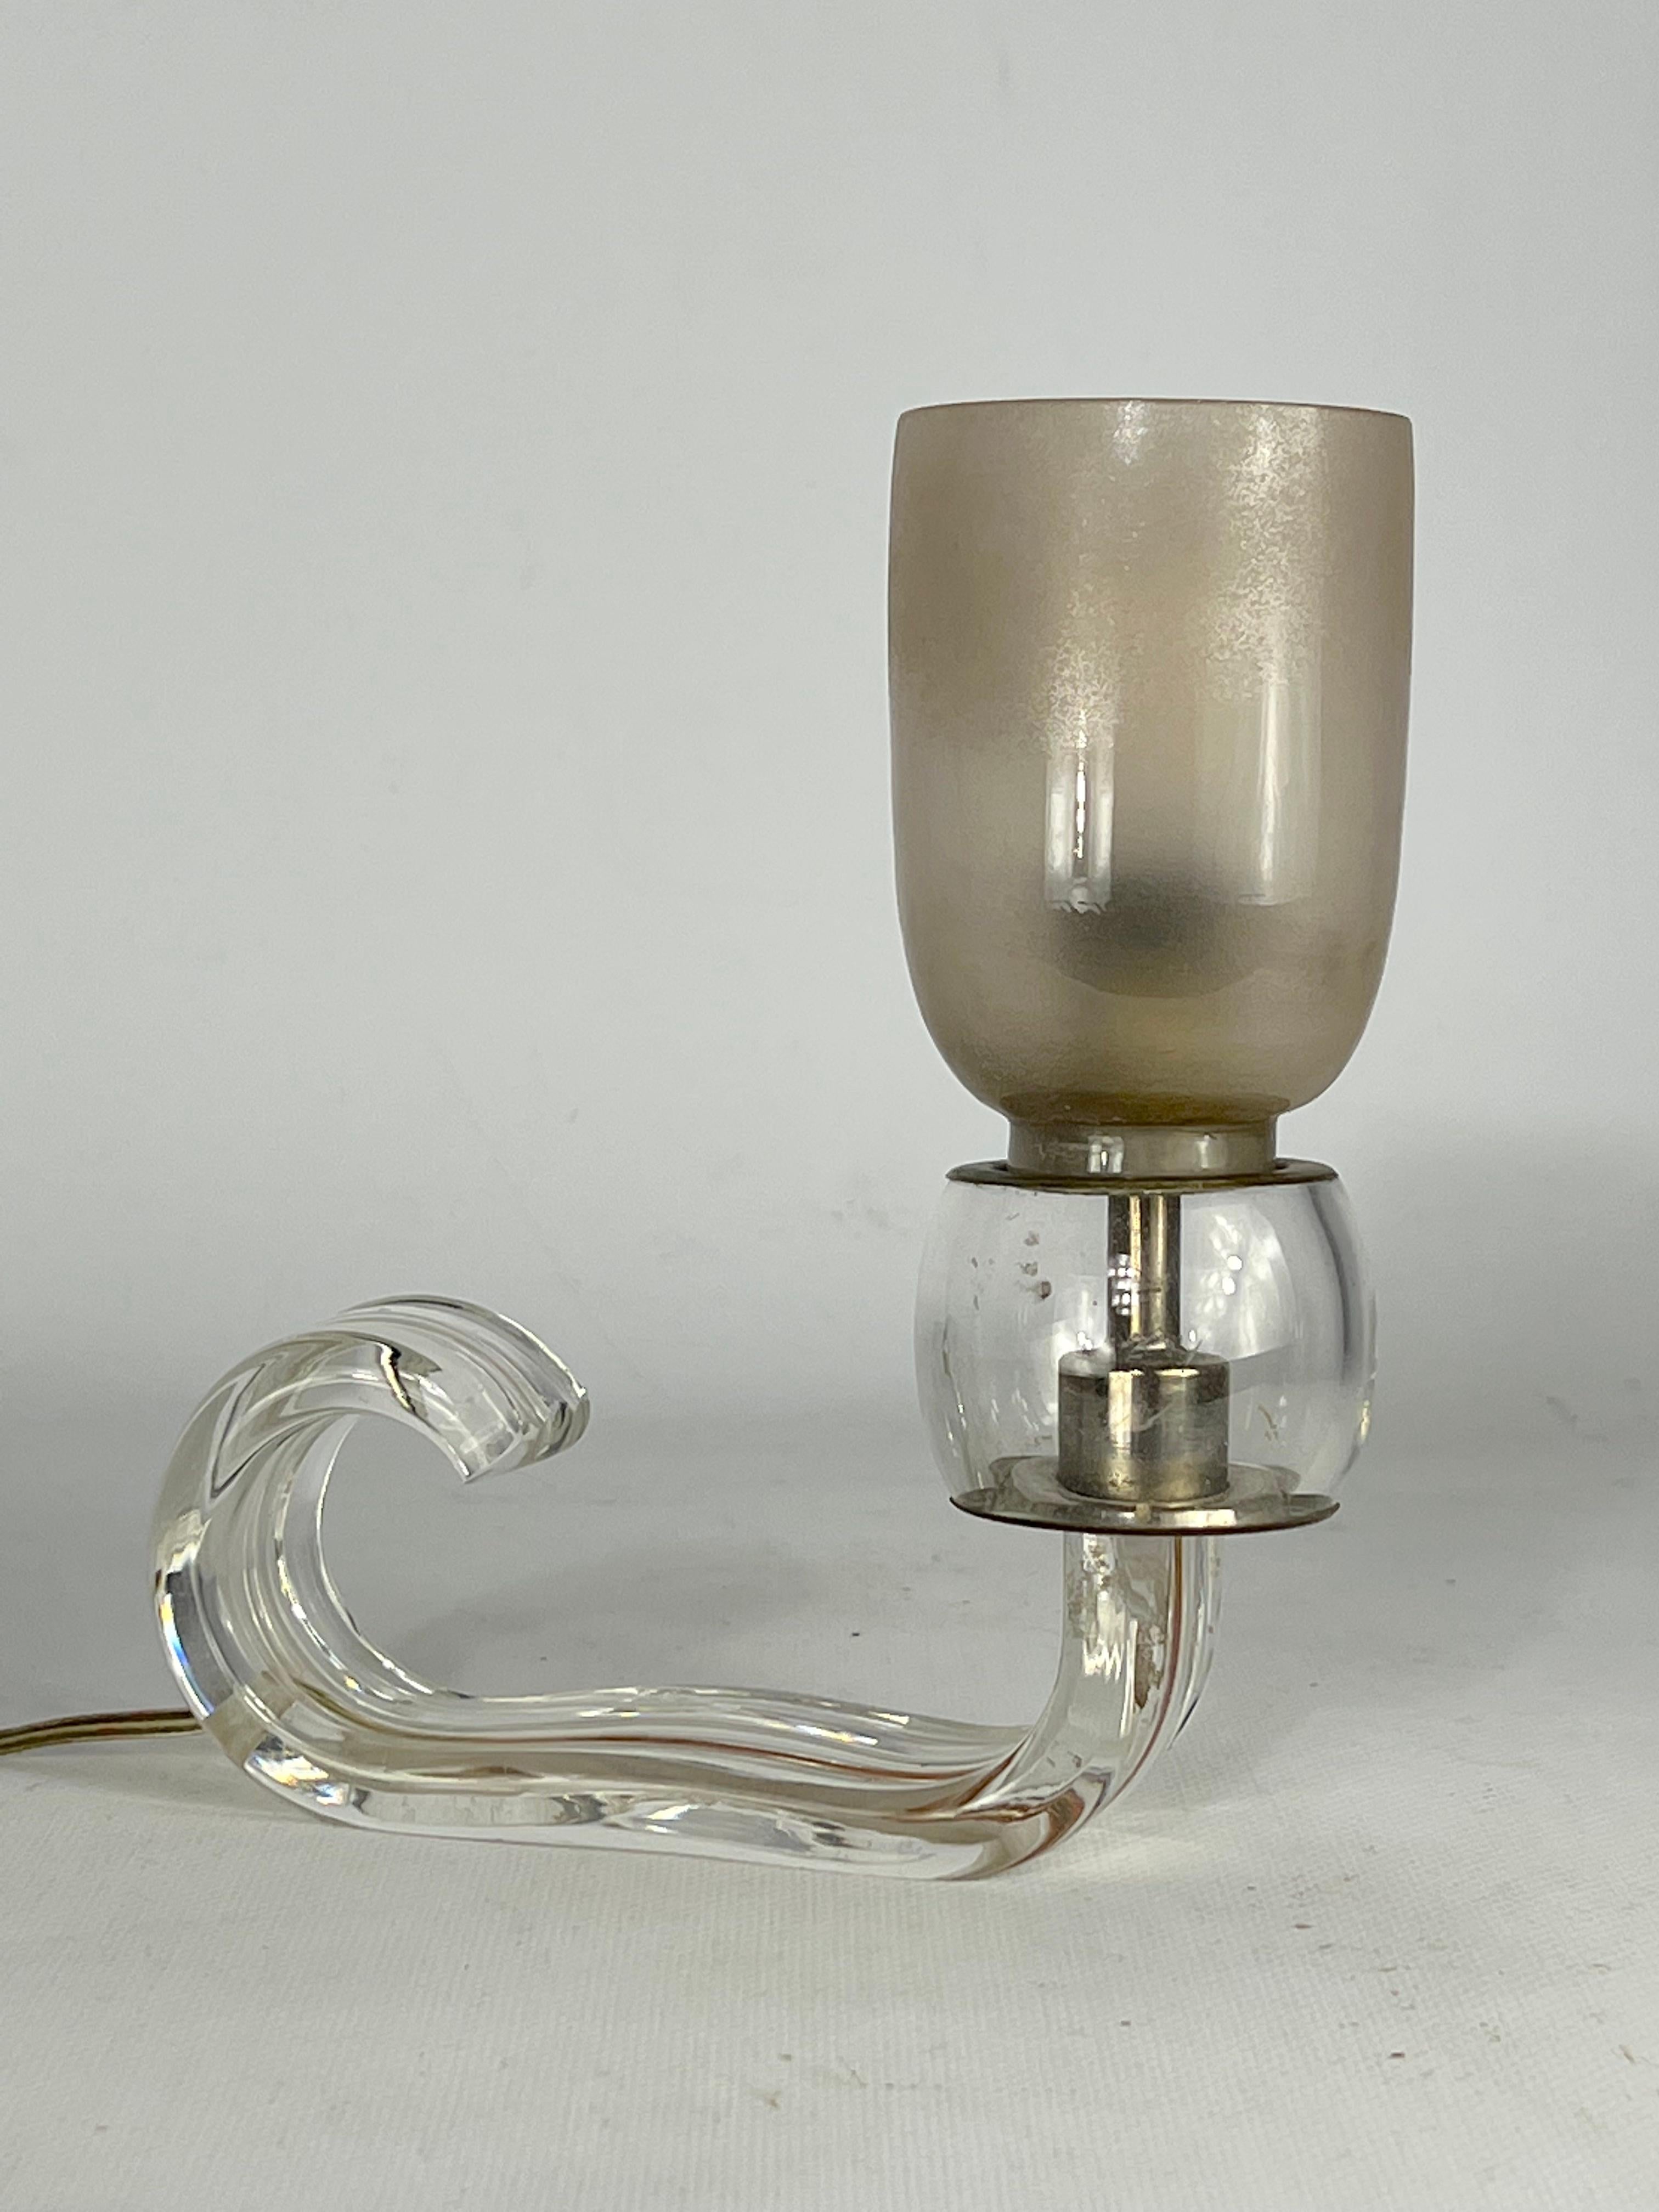 Great vintage condition with normal trace of age and use for this table lamp made from Murano glass and produced by Barovier during the 30s. No cracks or chips. It mounts a single socket for E14 lamp. Full working with EU standard, adaptable on